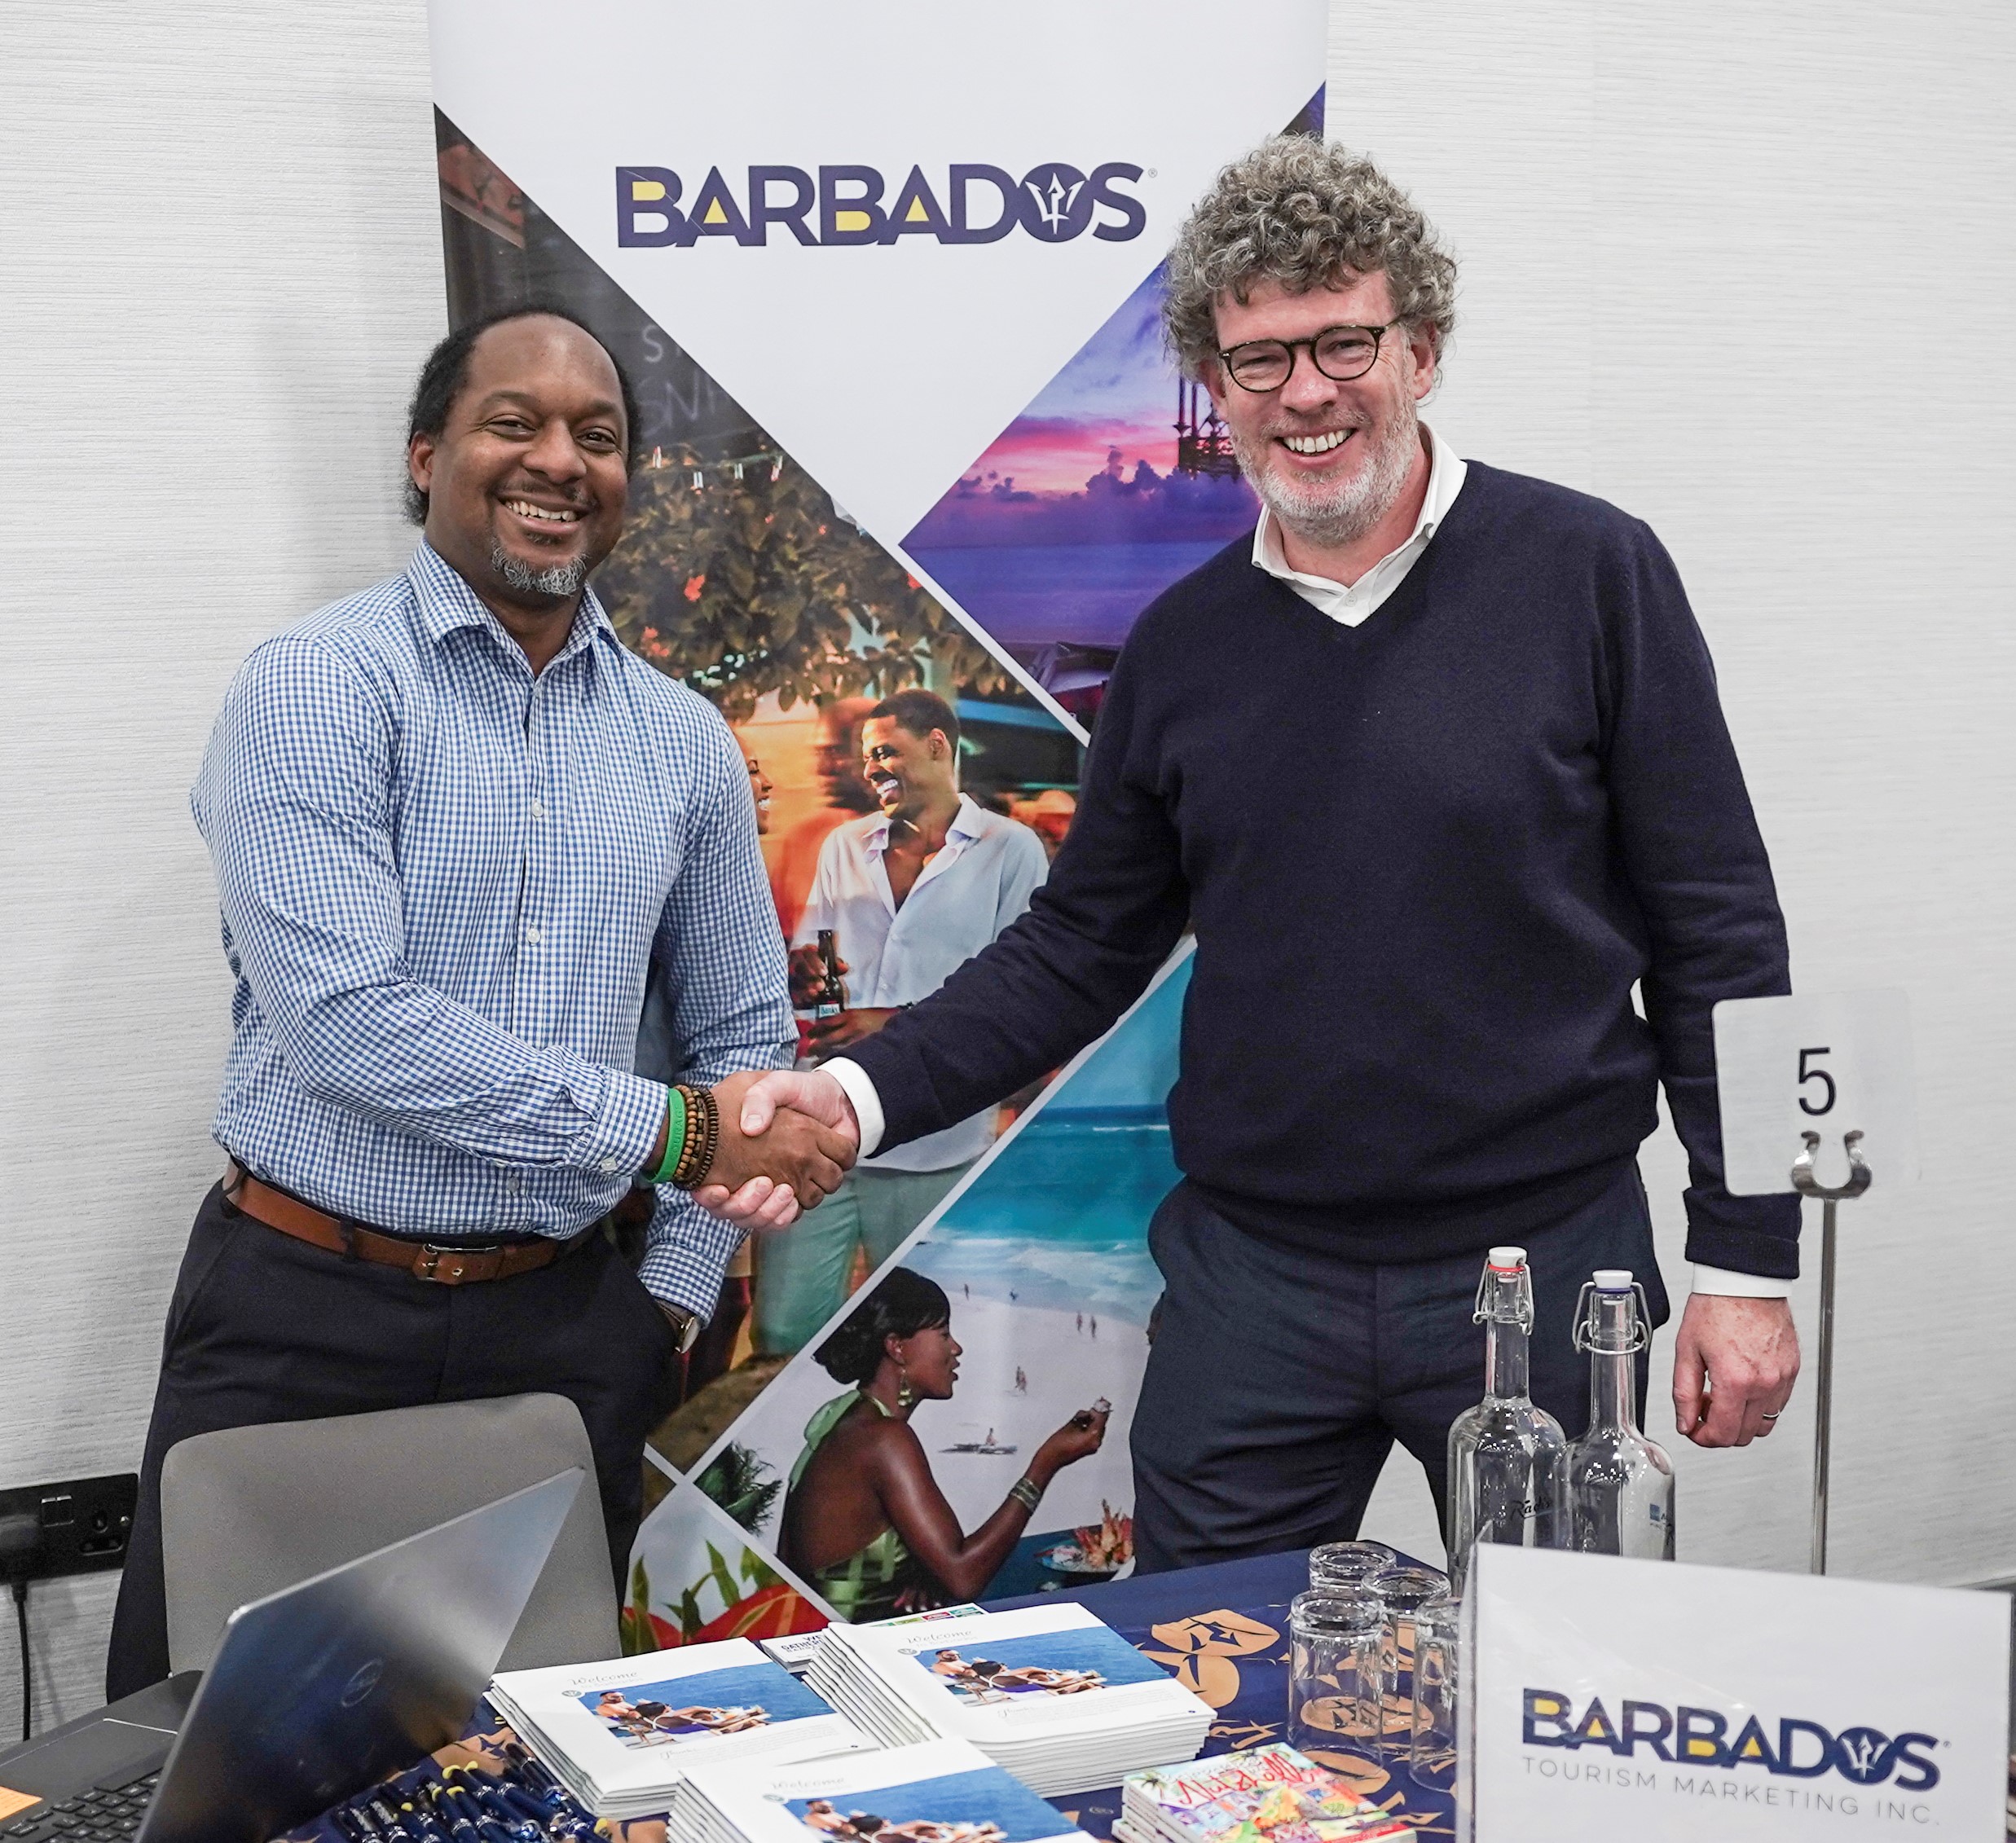 Michael Collins of TravelMedia.ie shaking hands with Mark McCollin of Visit Barbados